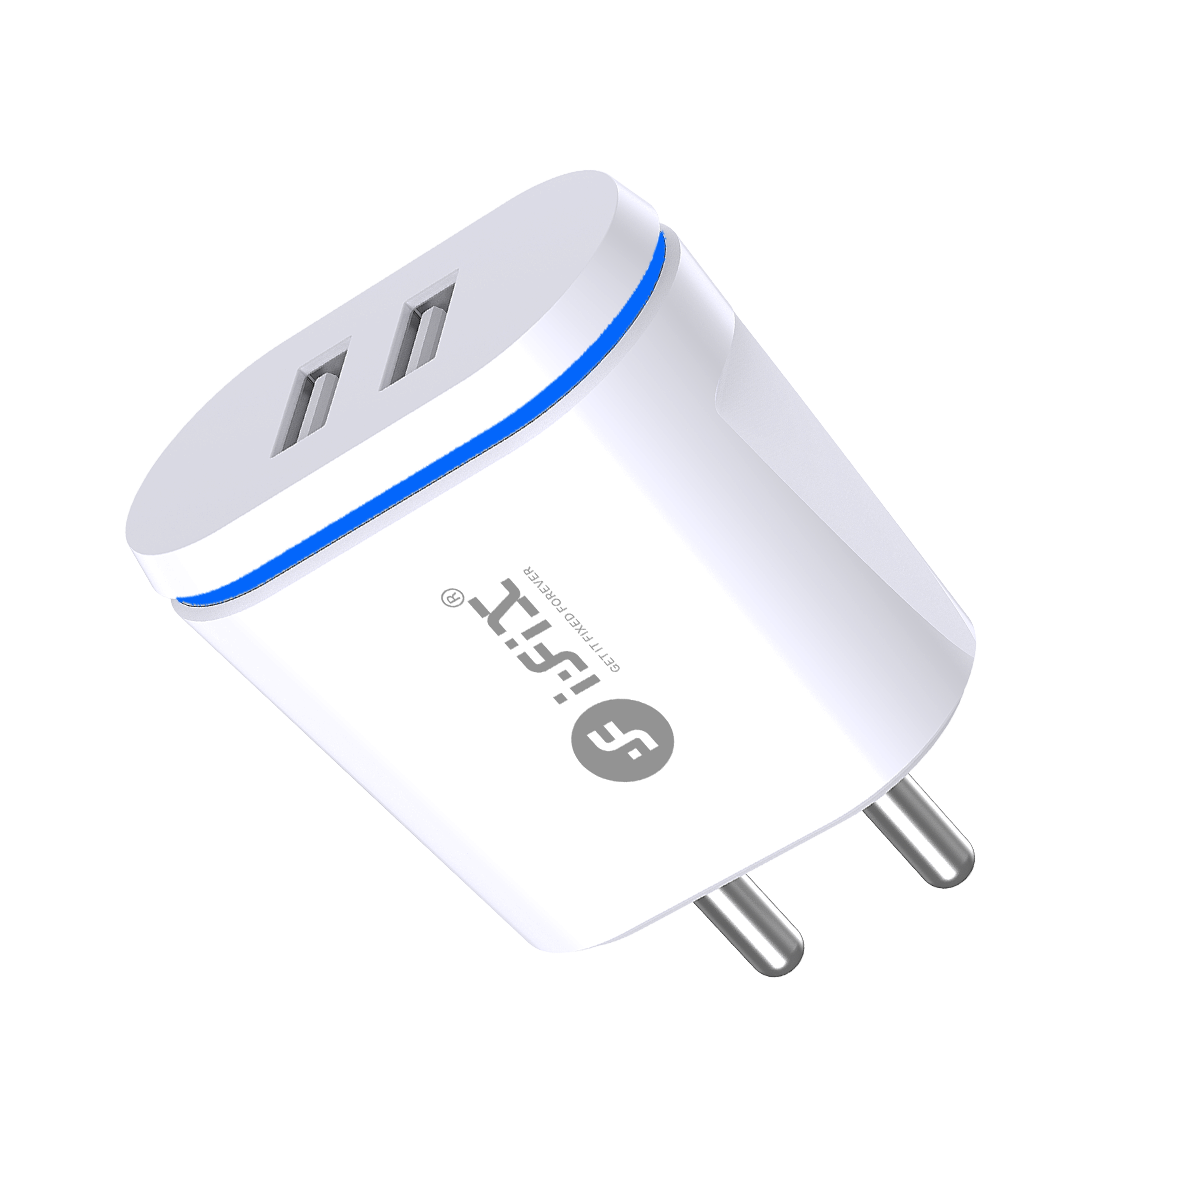 IF-08 Dual USB Port Type C Fast Charger